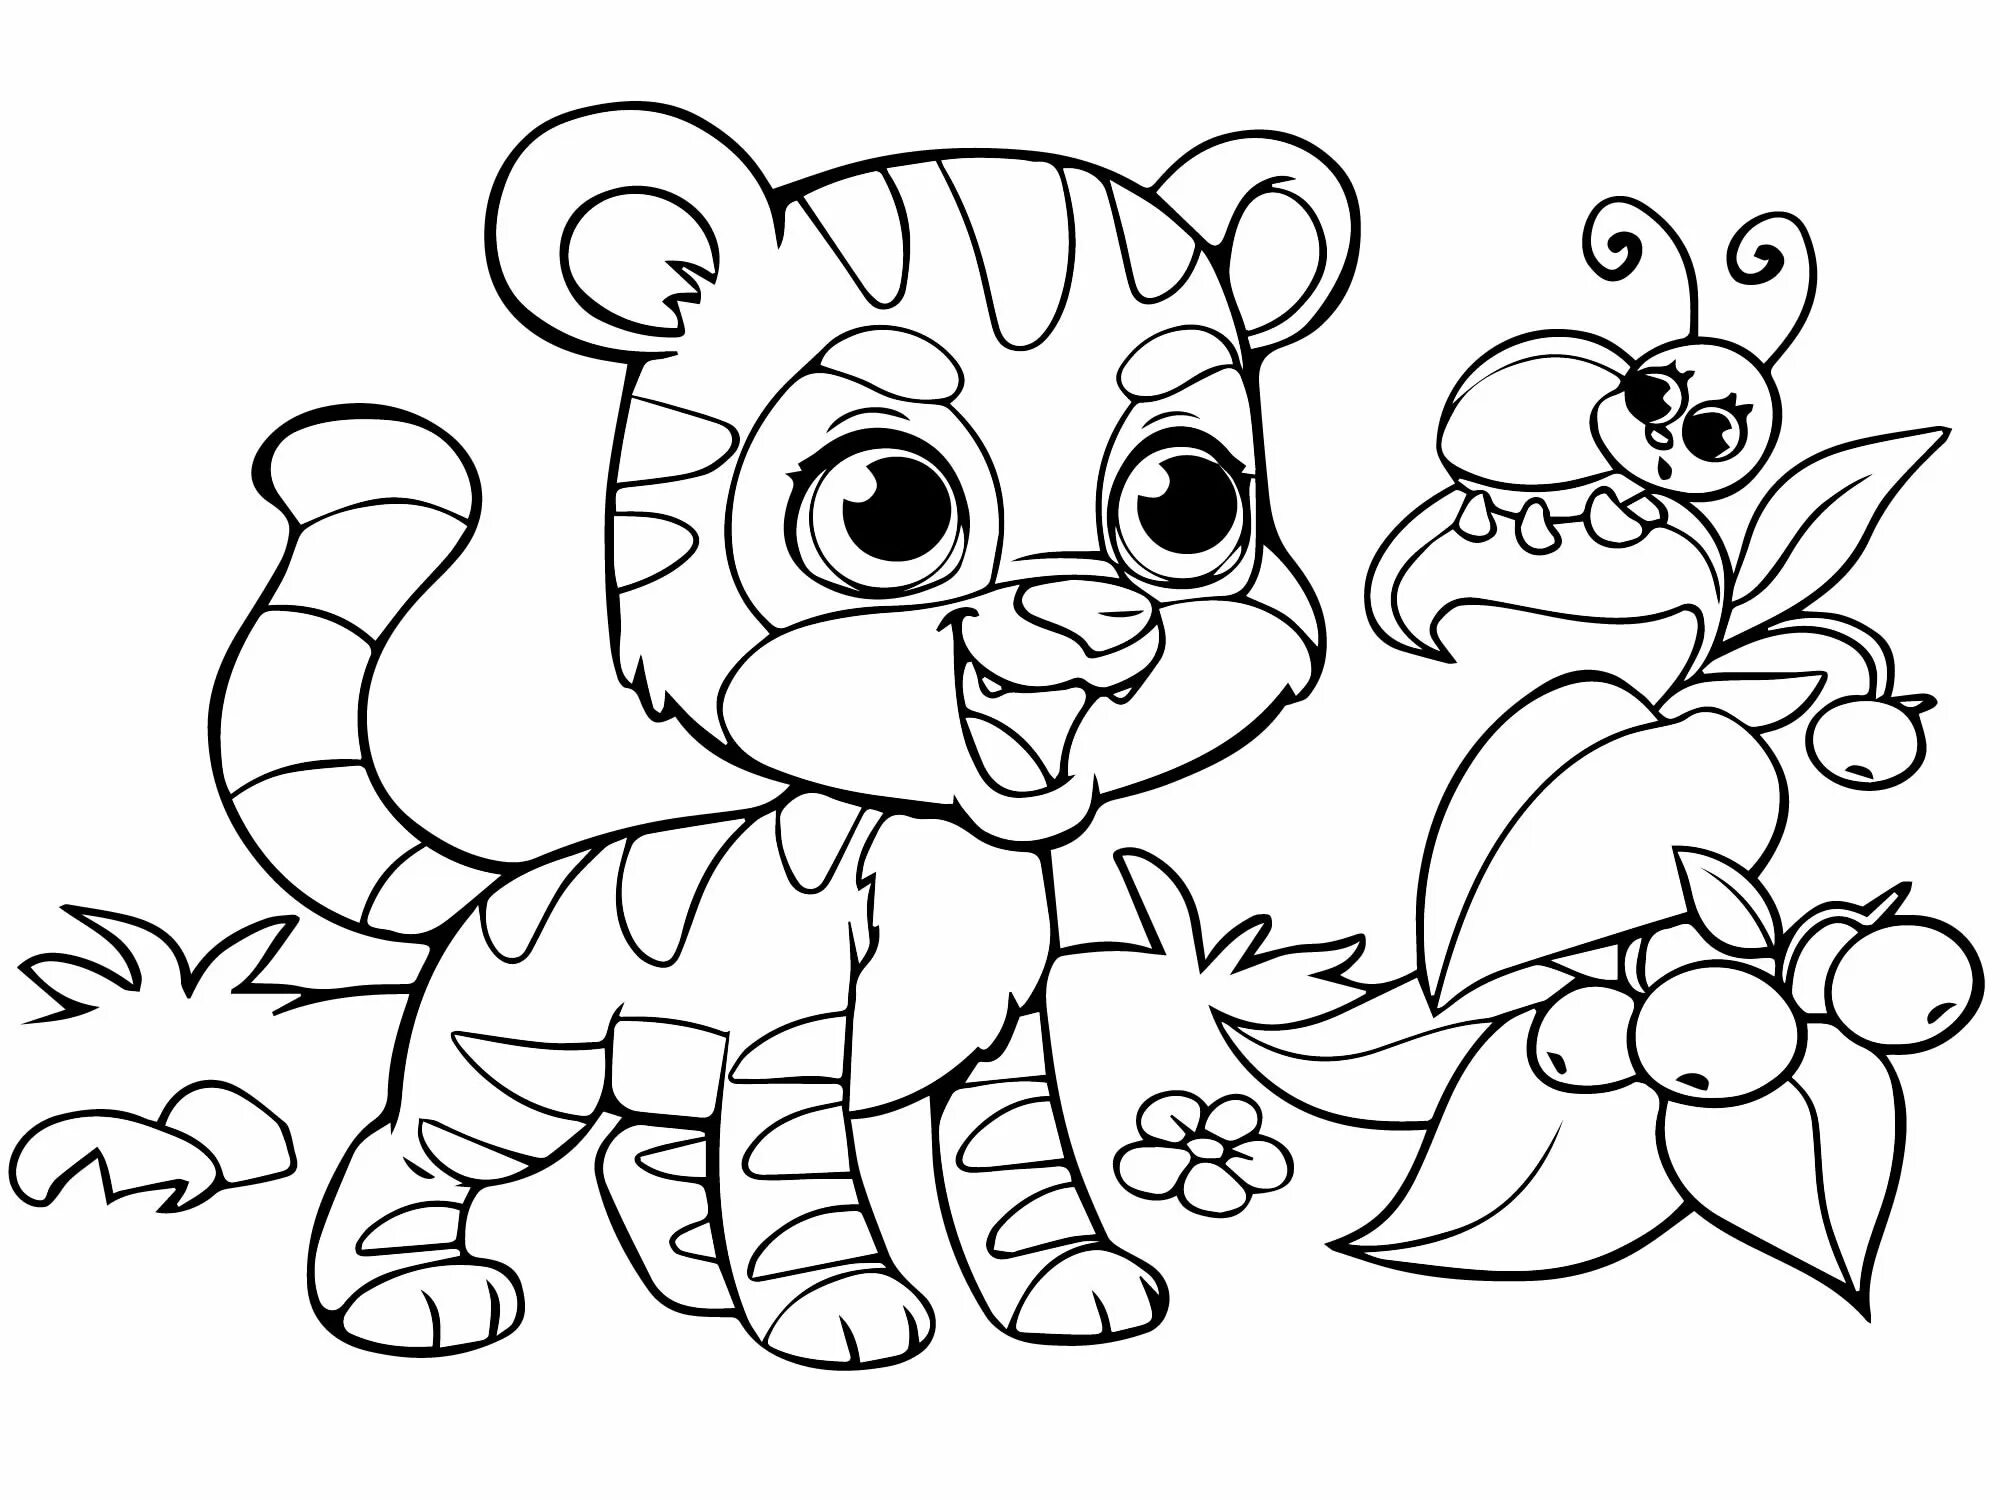 Coloring page spectacular tiger cub